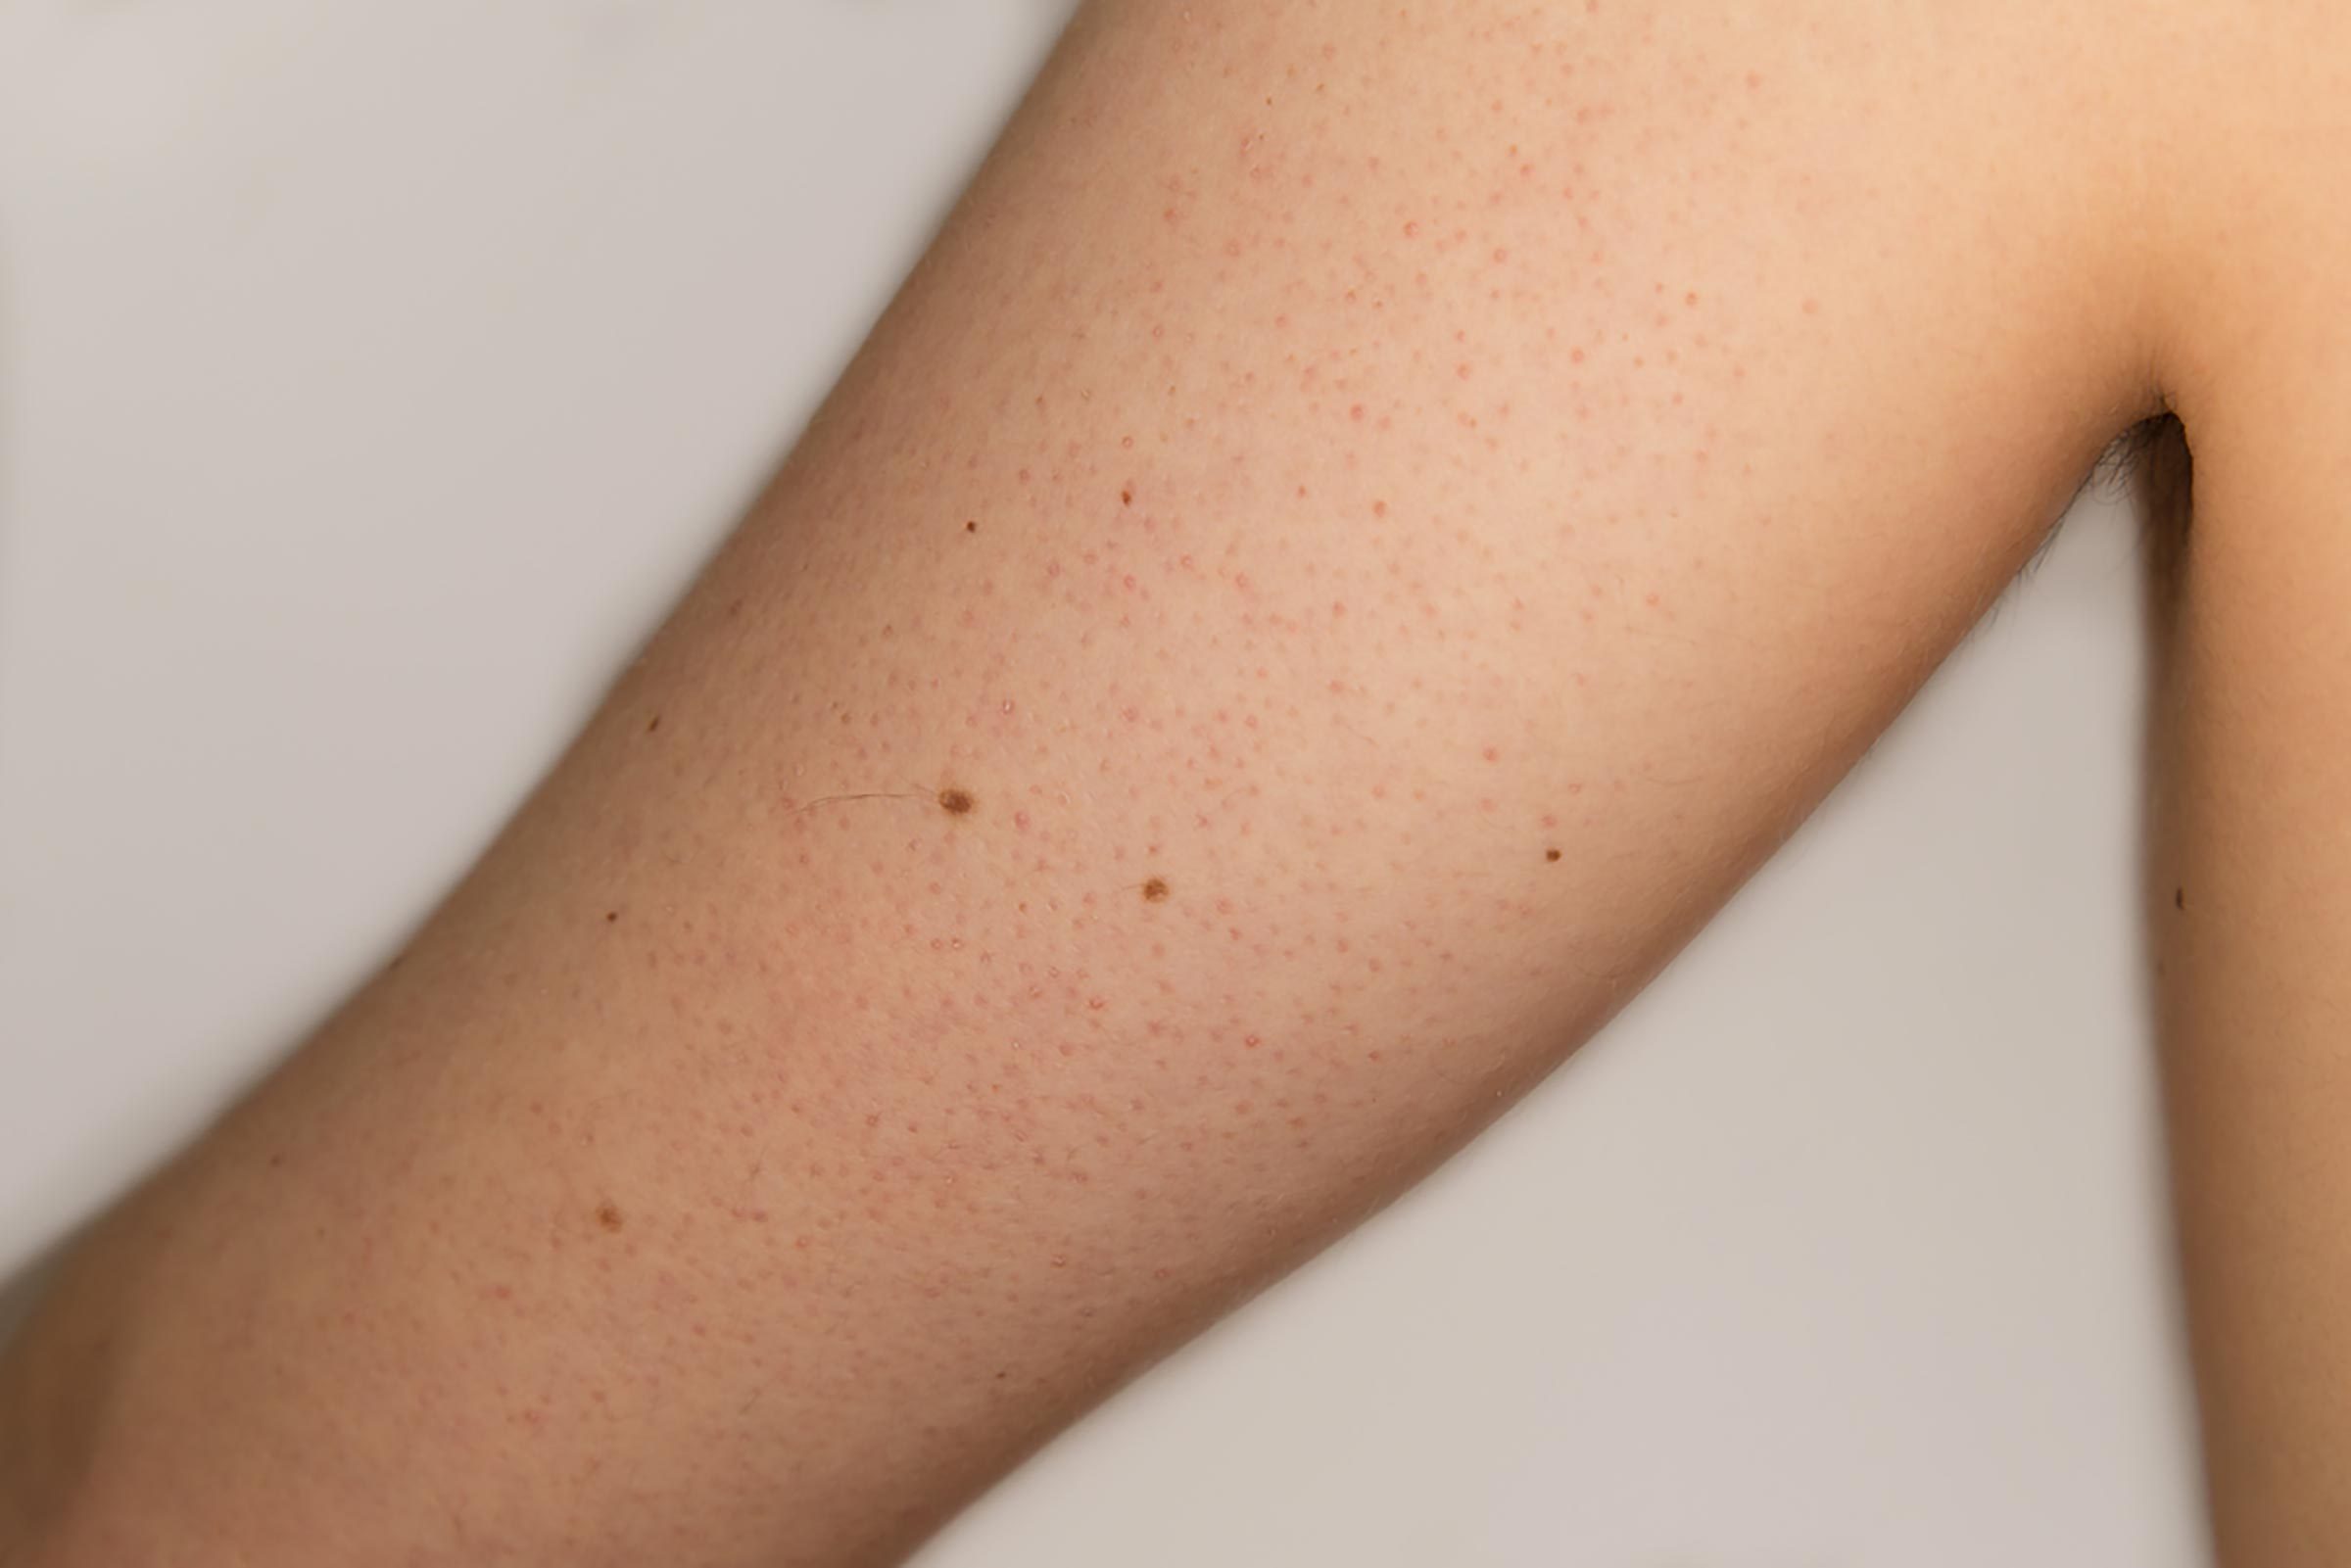 Boils, Cysts, Ingrown Hairs, and 11 Other Skin Mysteries Explained